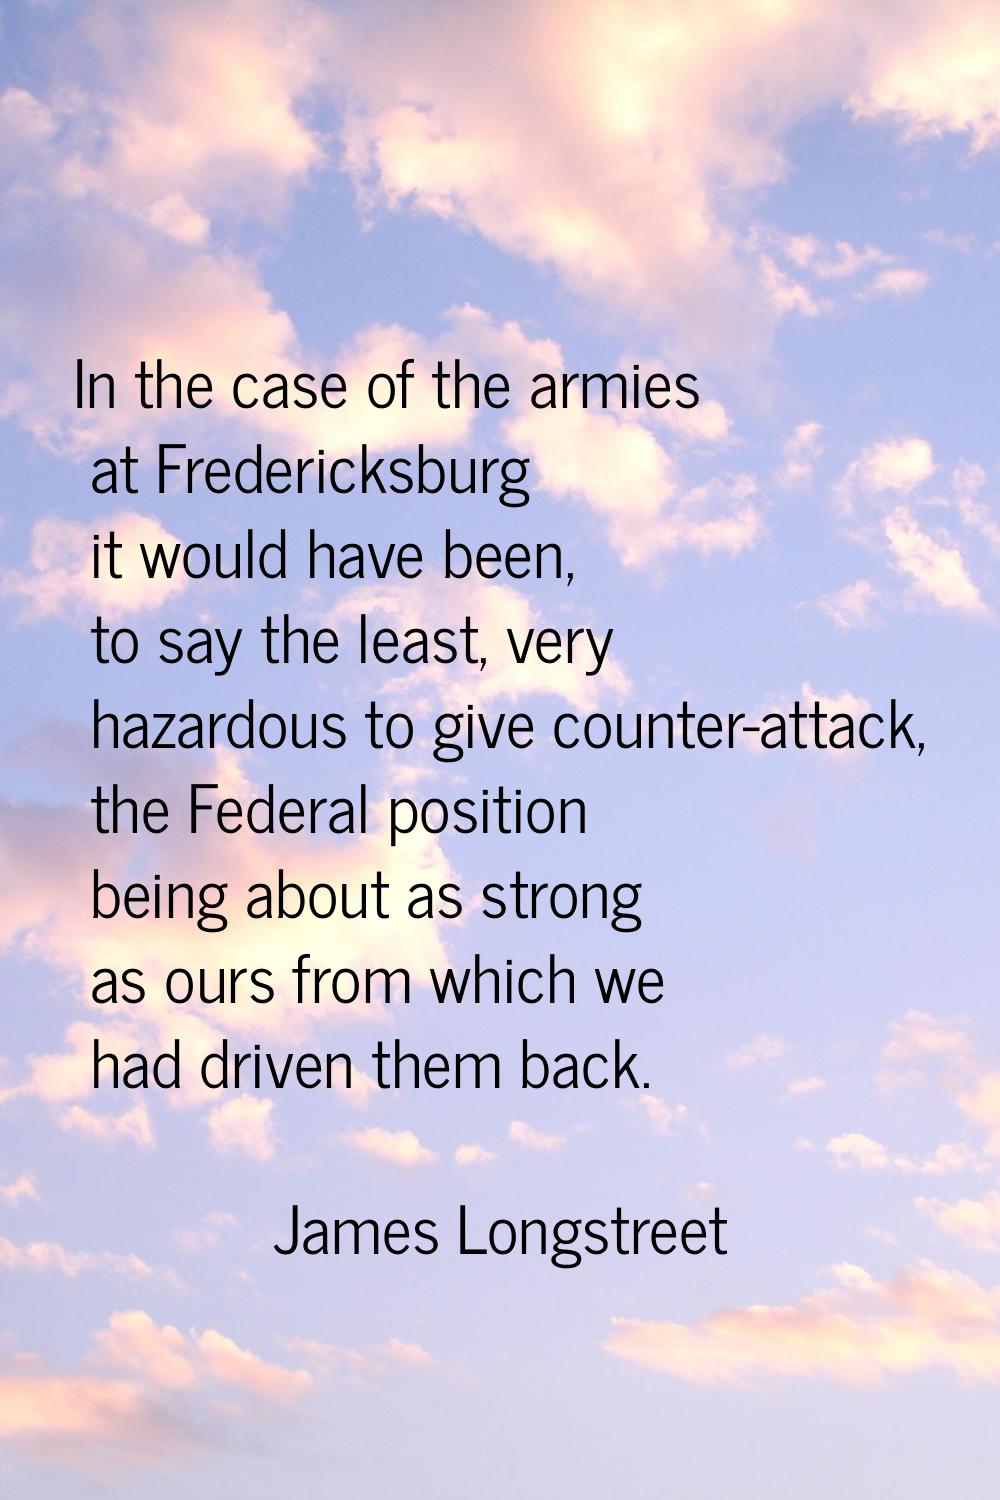 In the case of the armies at Fredericksburg it would have been, to say the least, very hazardous to